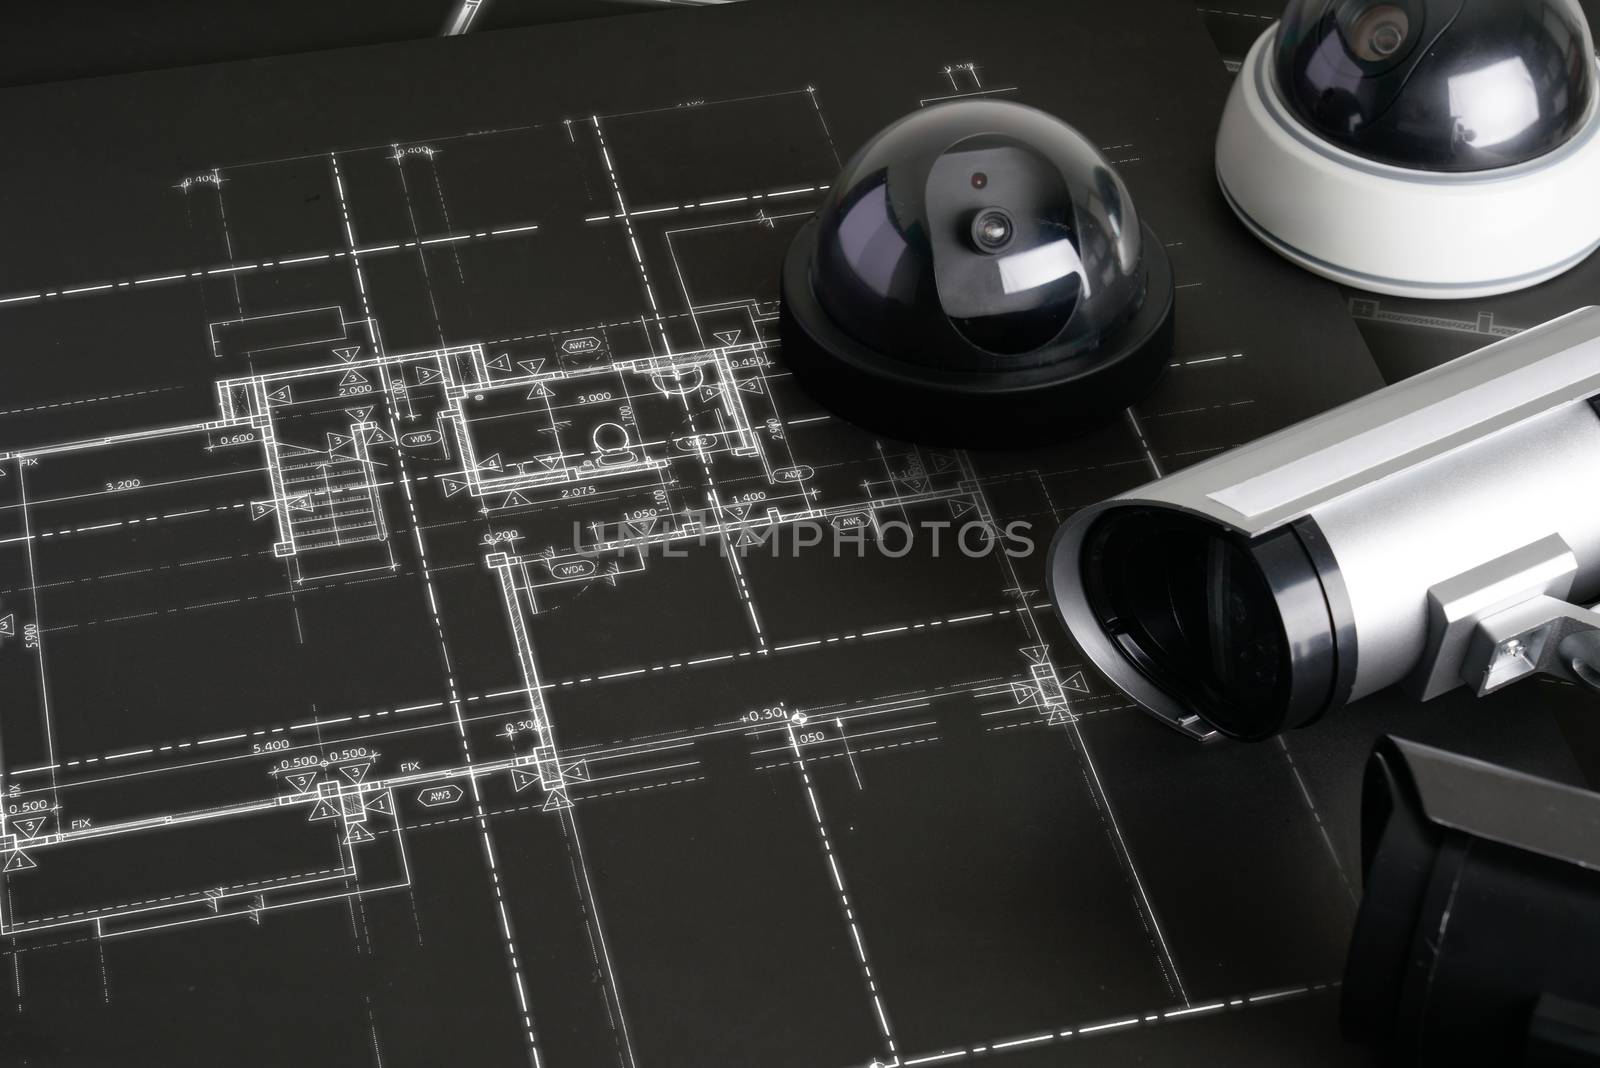 CCTV security online camera with house plan by Alicephoto